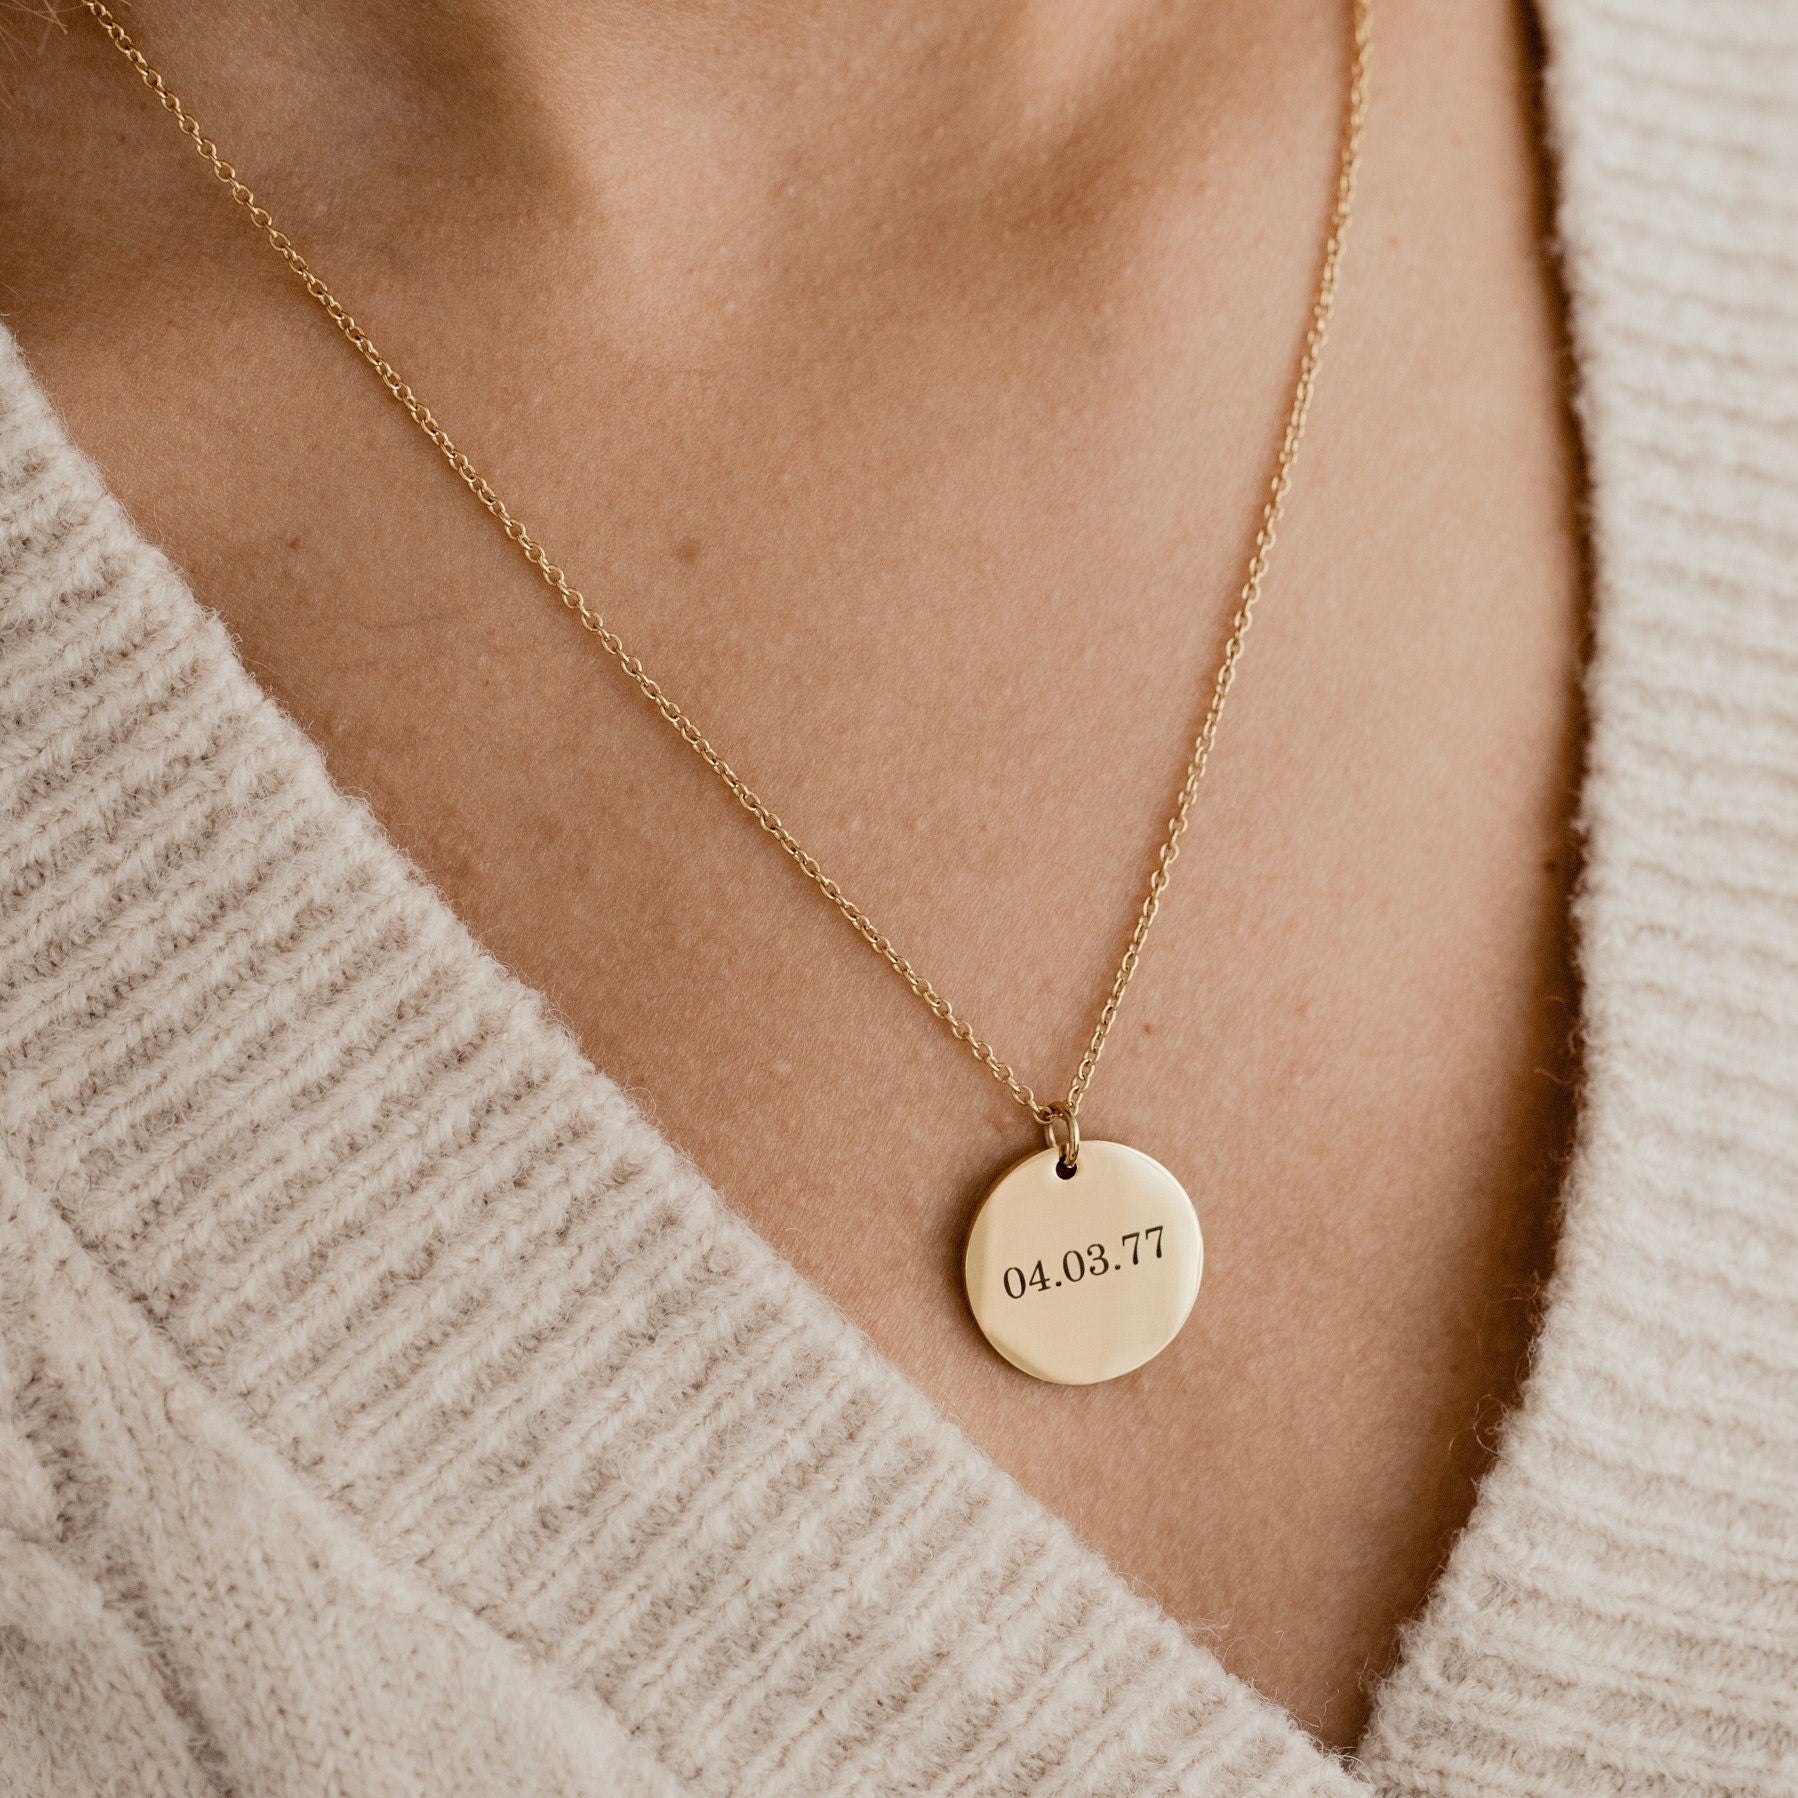 Personalized Engraved Name Necklace Gifts For Mom Custom Family Jewelry - San Diego